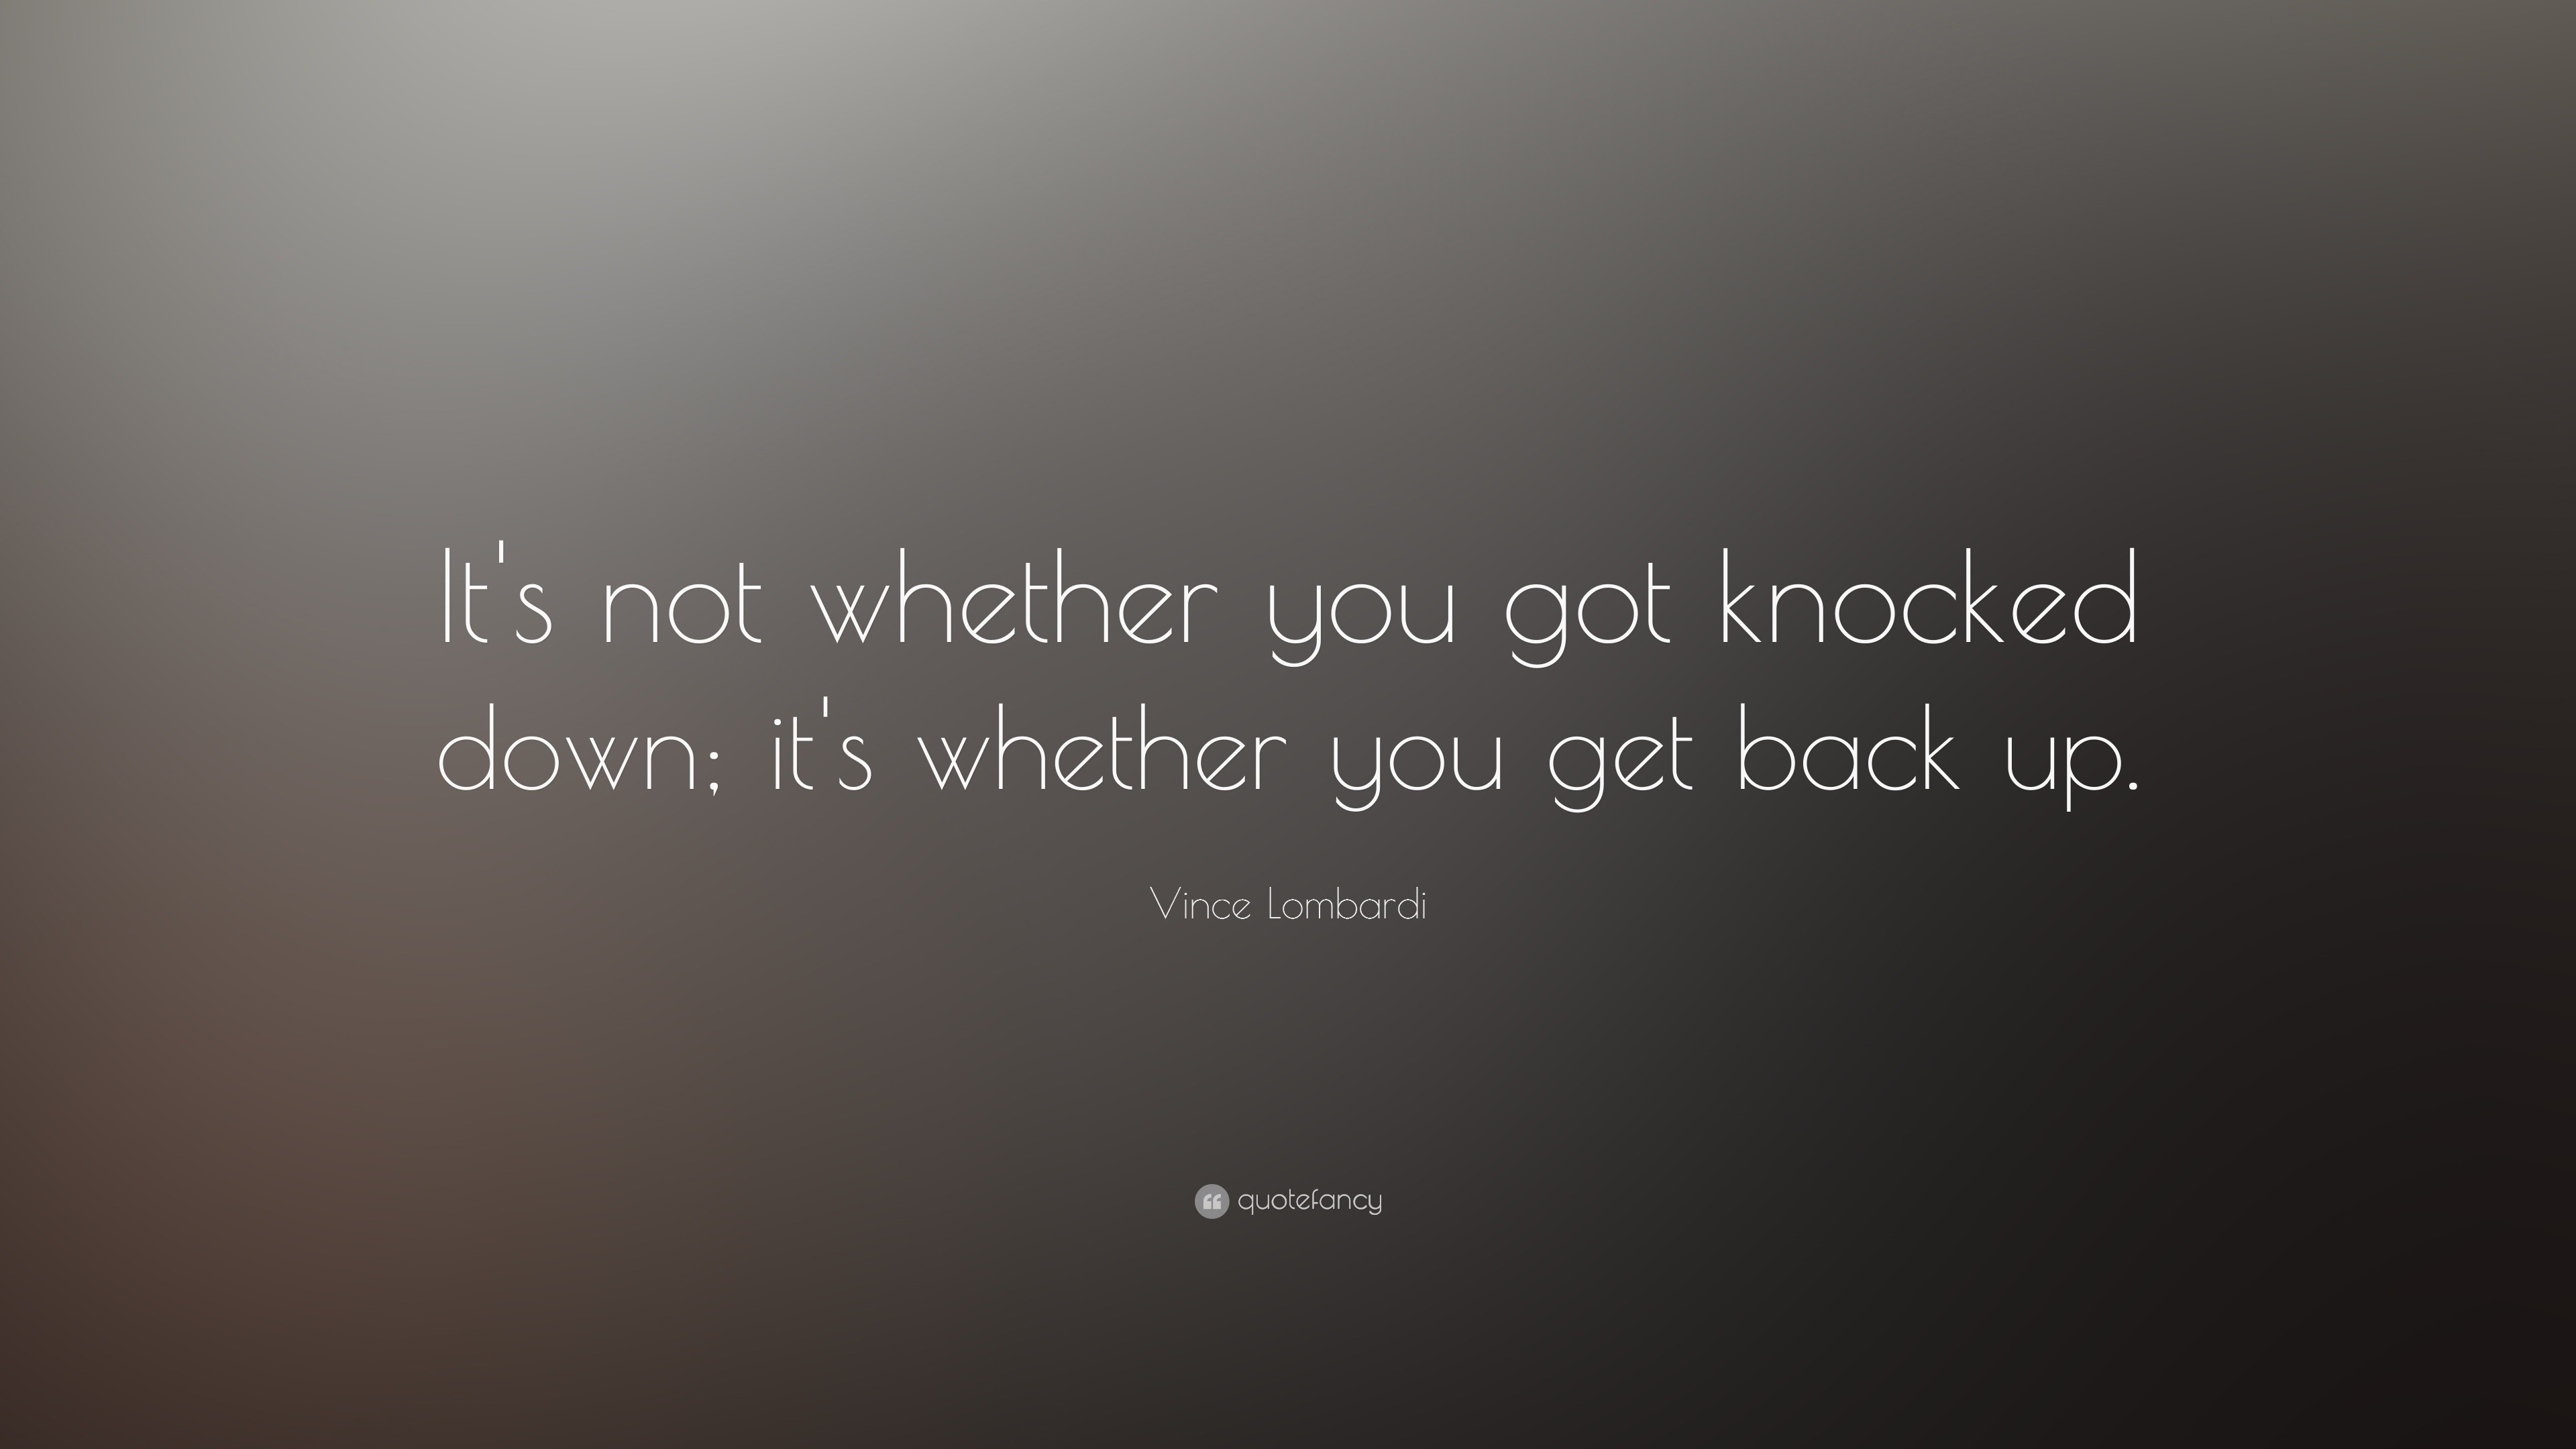 Vince Lombardi Quote It S Not Whether You Got Knocked Down It S Whether You Get Back Up 13 Wallpapers Quotefancy